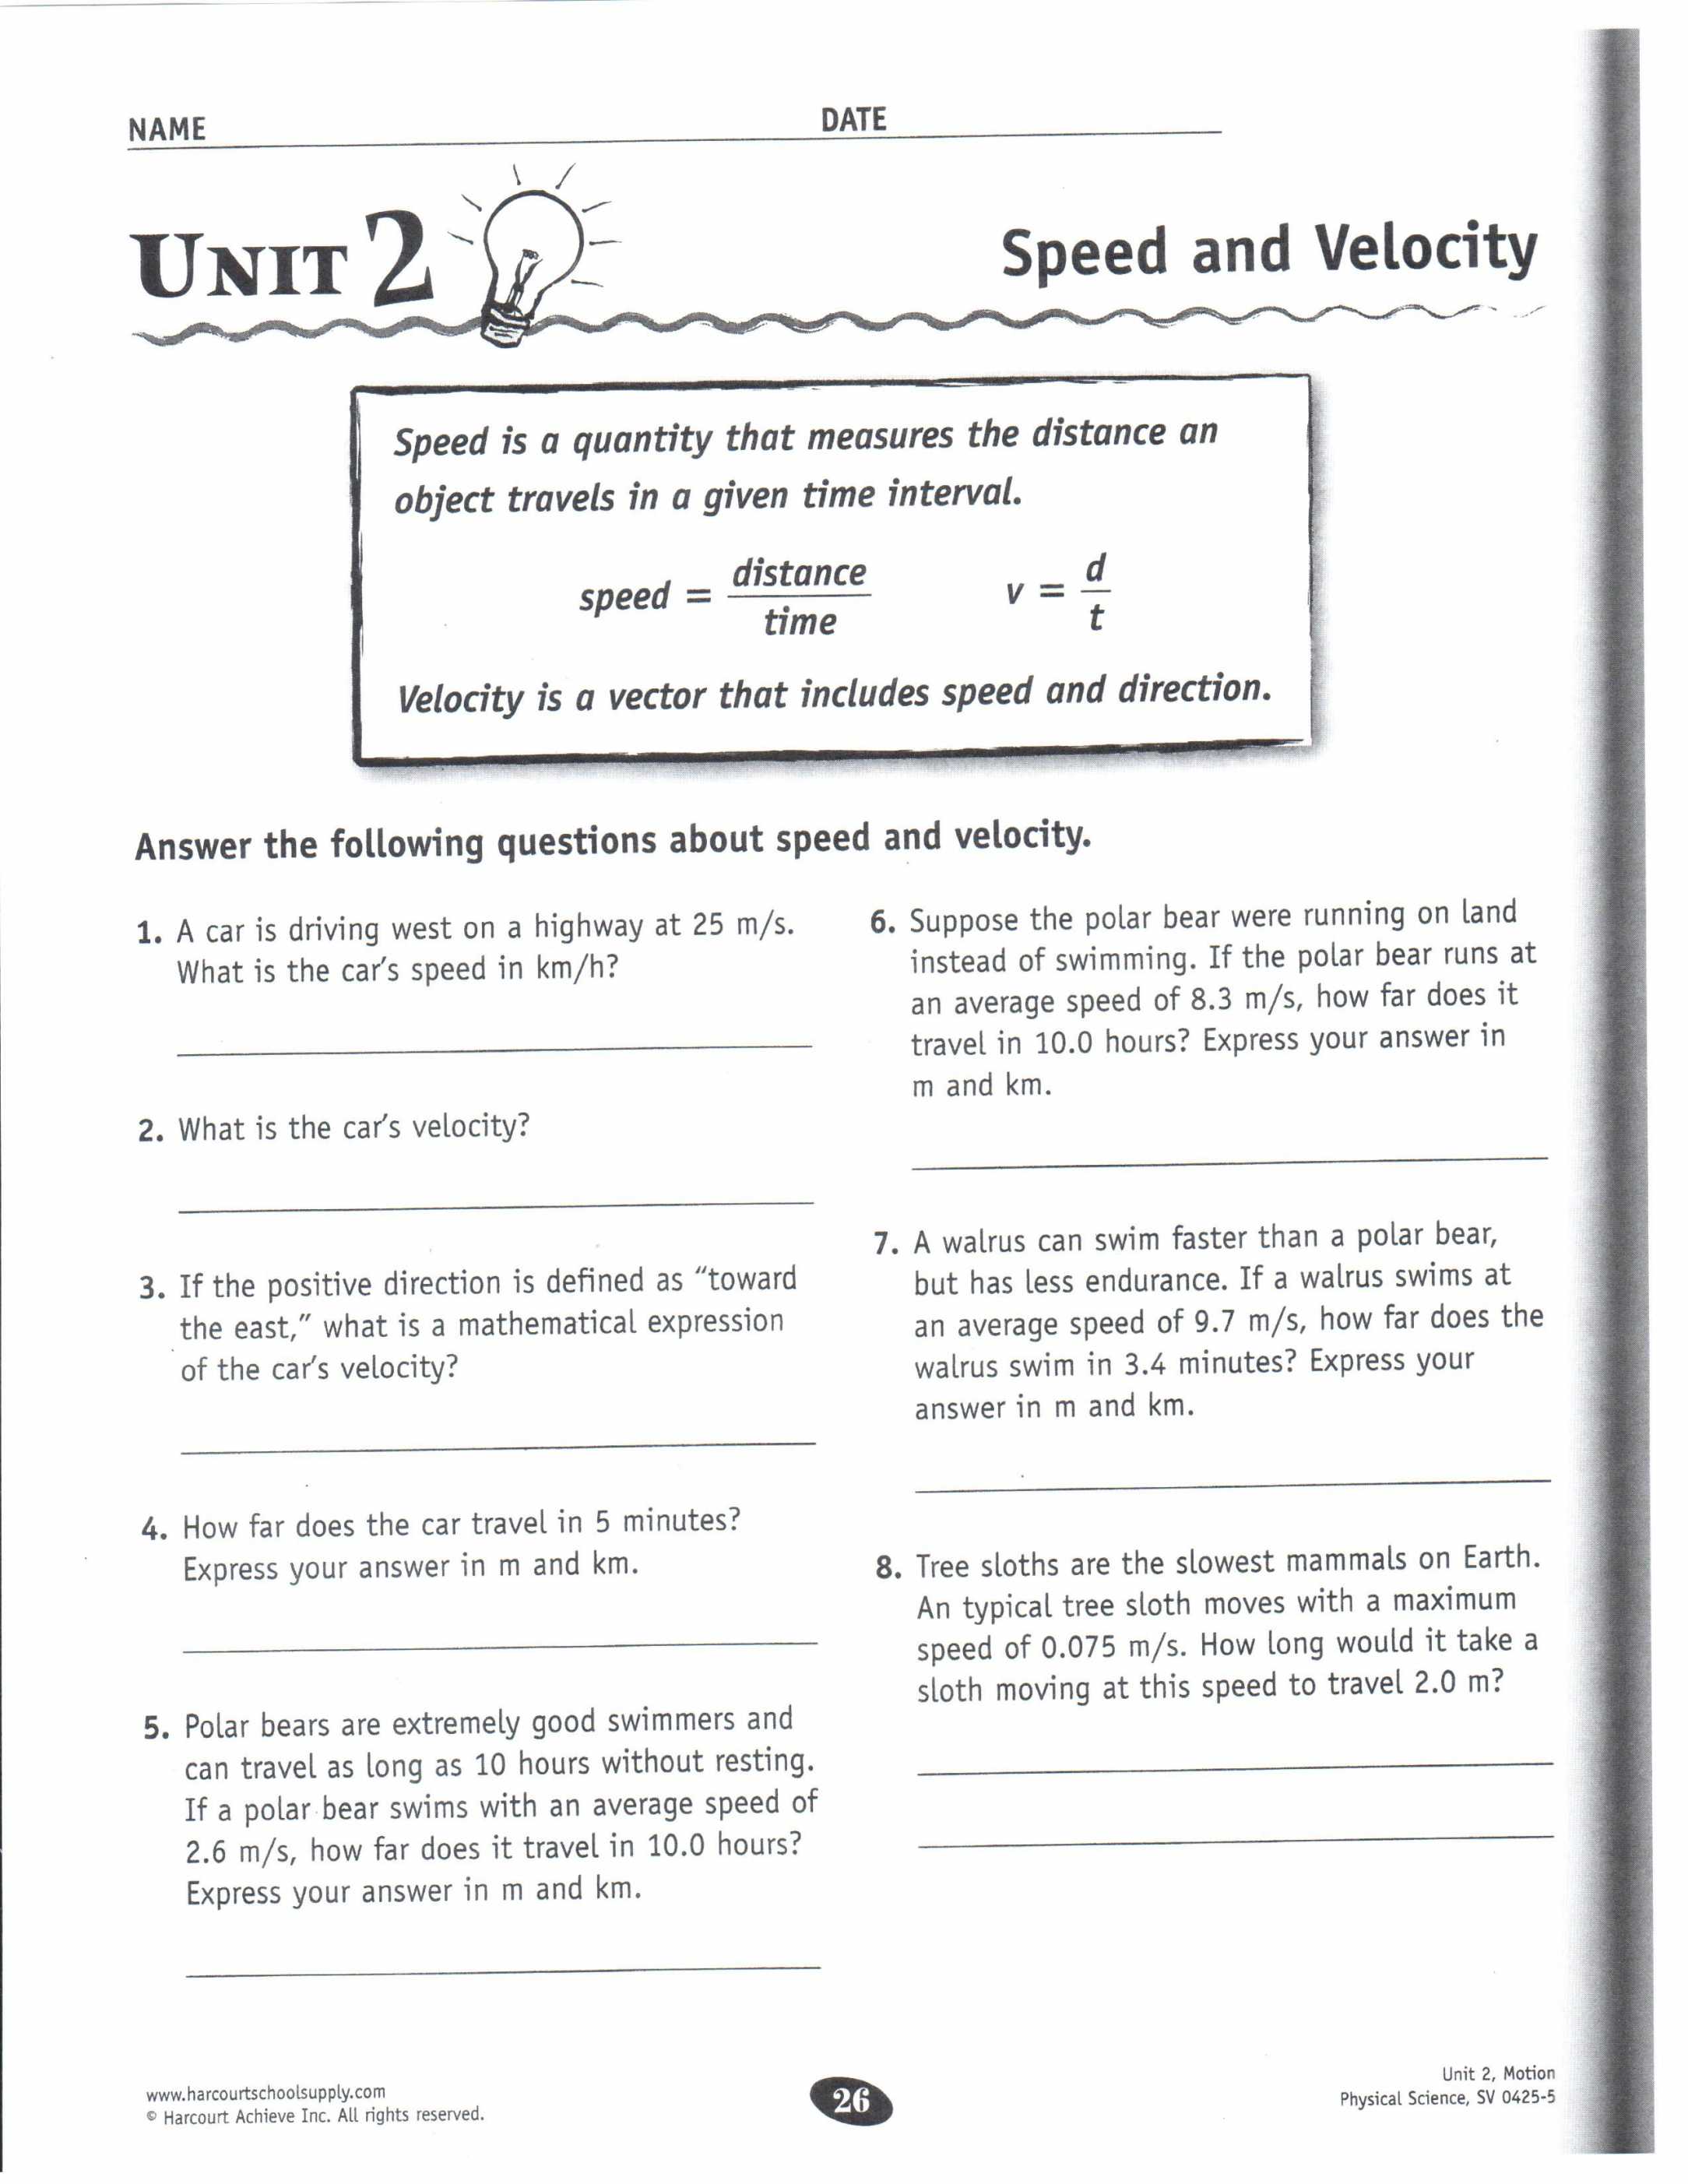 Speed Velocity and Acceleration Calculations Worksheet as Well as Worksheet Speed and Velocity Worksheet Picture Speed Velocity